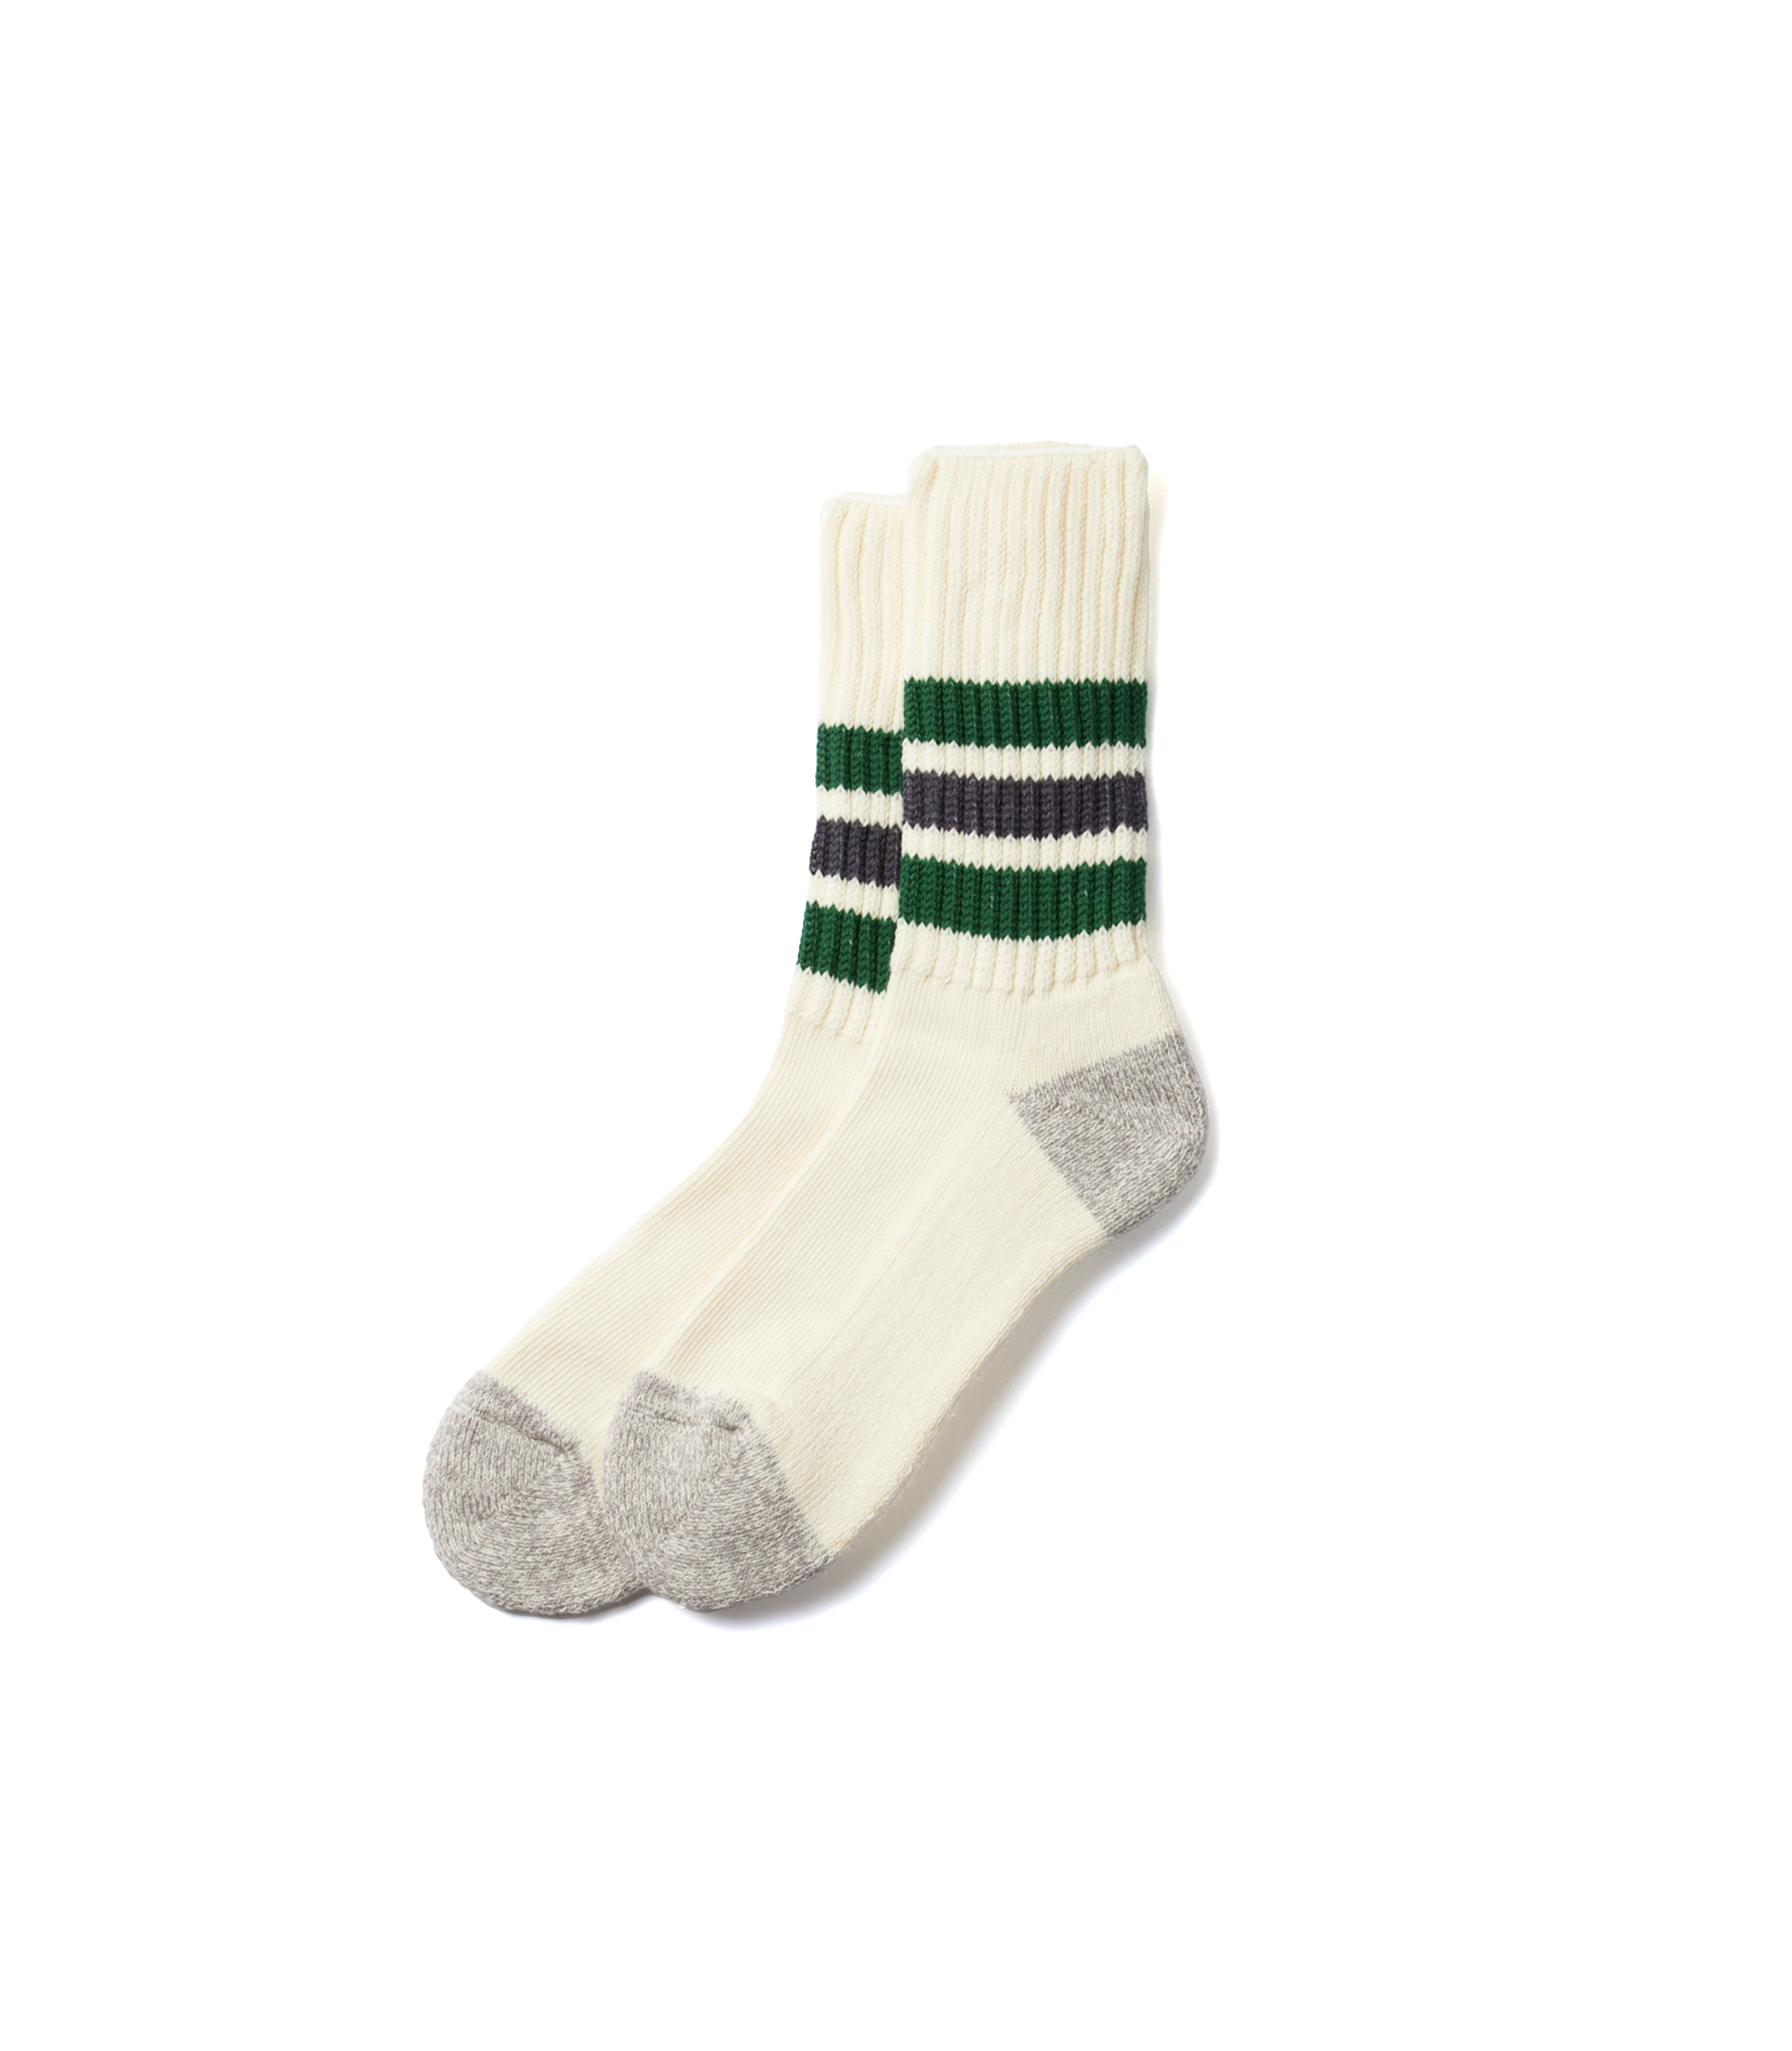 Coarse Ribbed Oldschool - Green / Charcoal